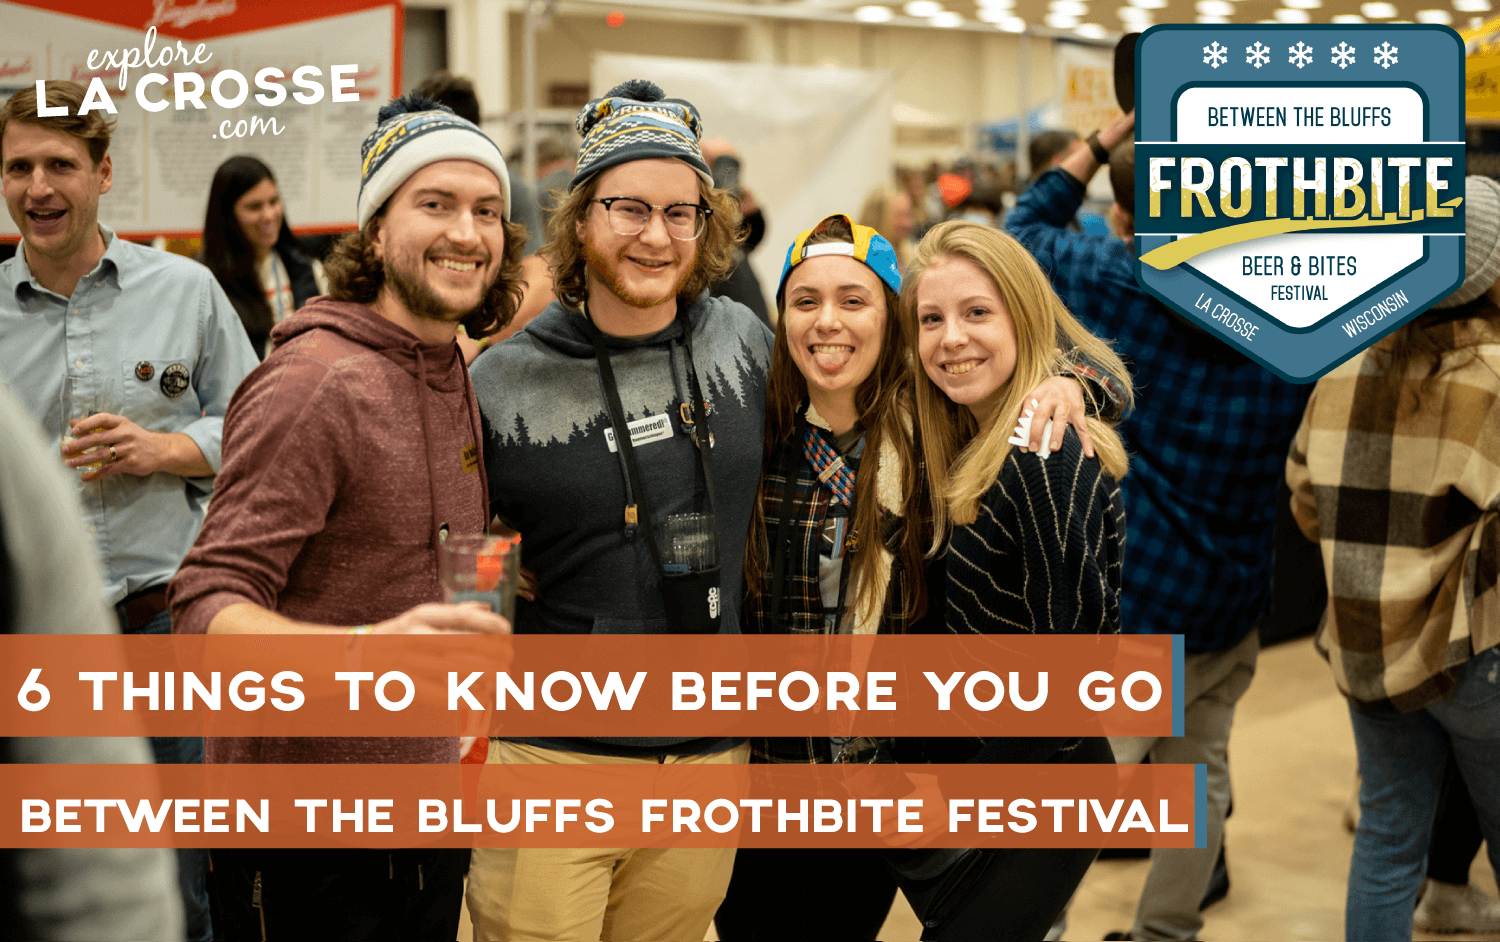 6 Things To Know Before You Go to Frothbite Beer & Bites Festival